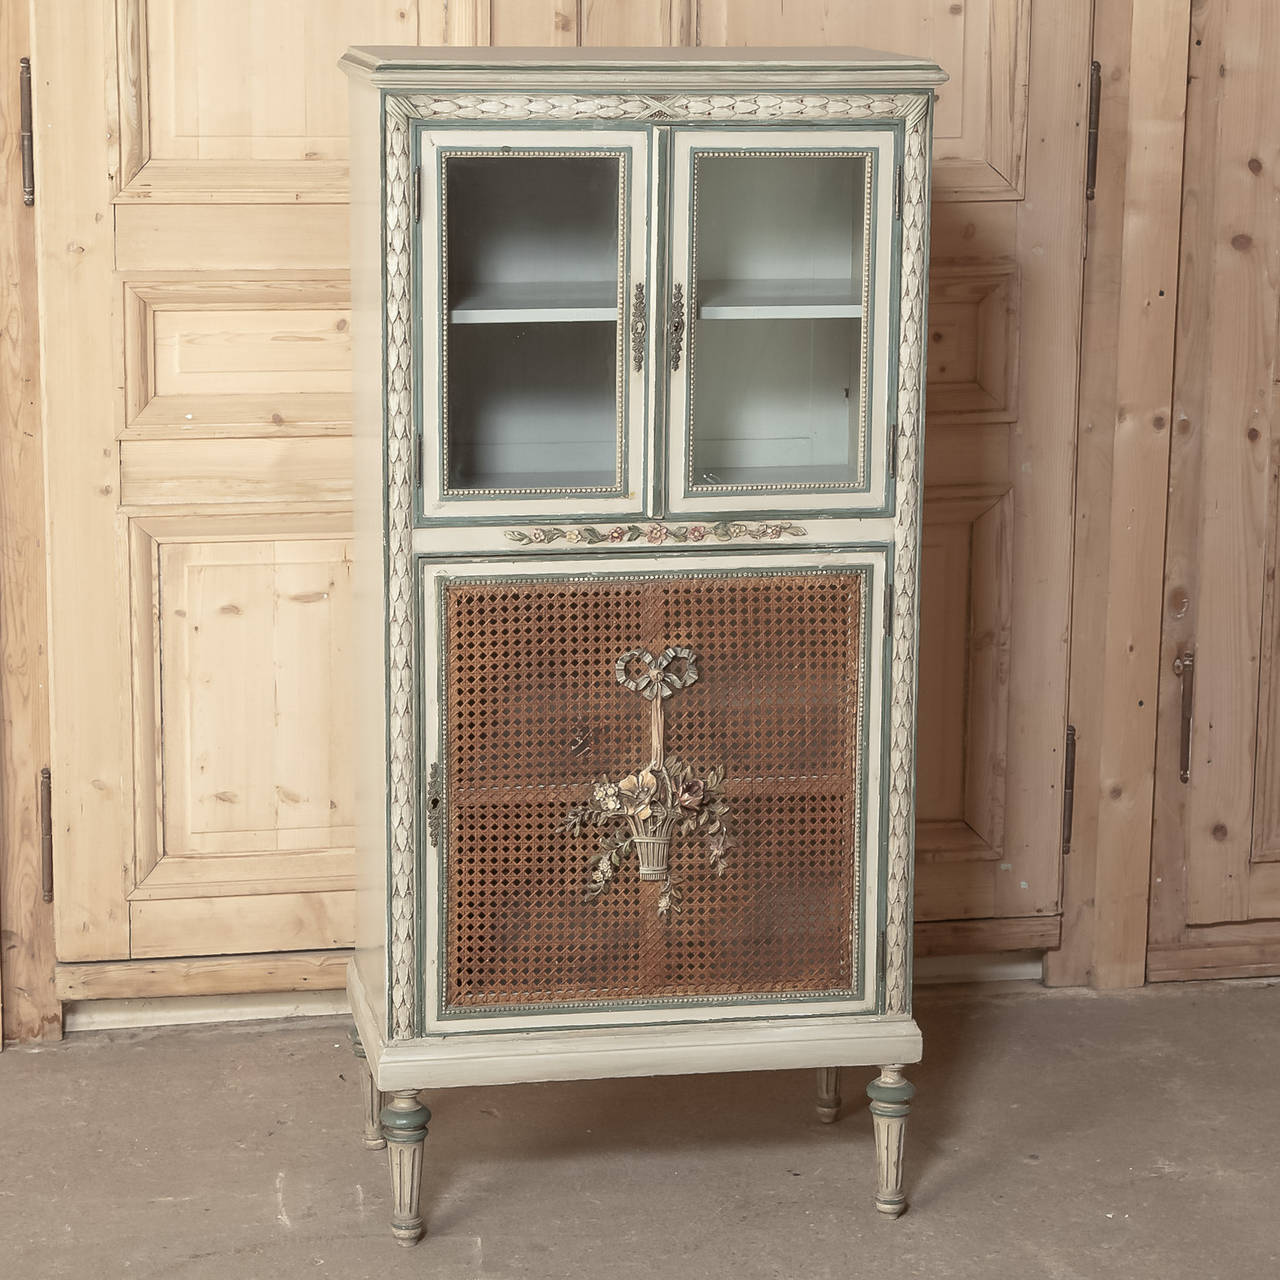 Boasting Classic styling, hand-carved embellishment, caned panel and display, all with original patinated painted finish, this charming little antique French Louis XVI vitrine allows one to display on top and store on bottom with style! Of